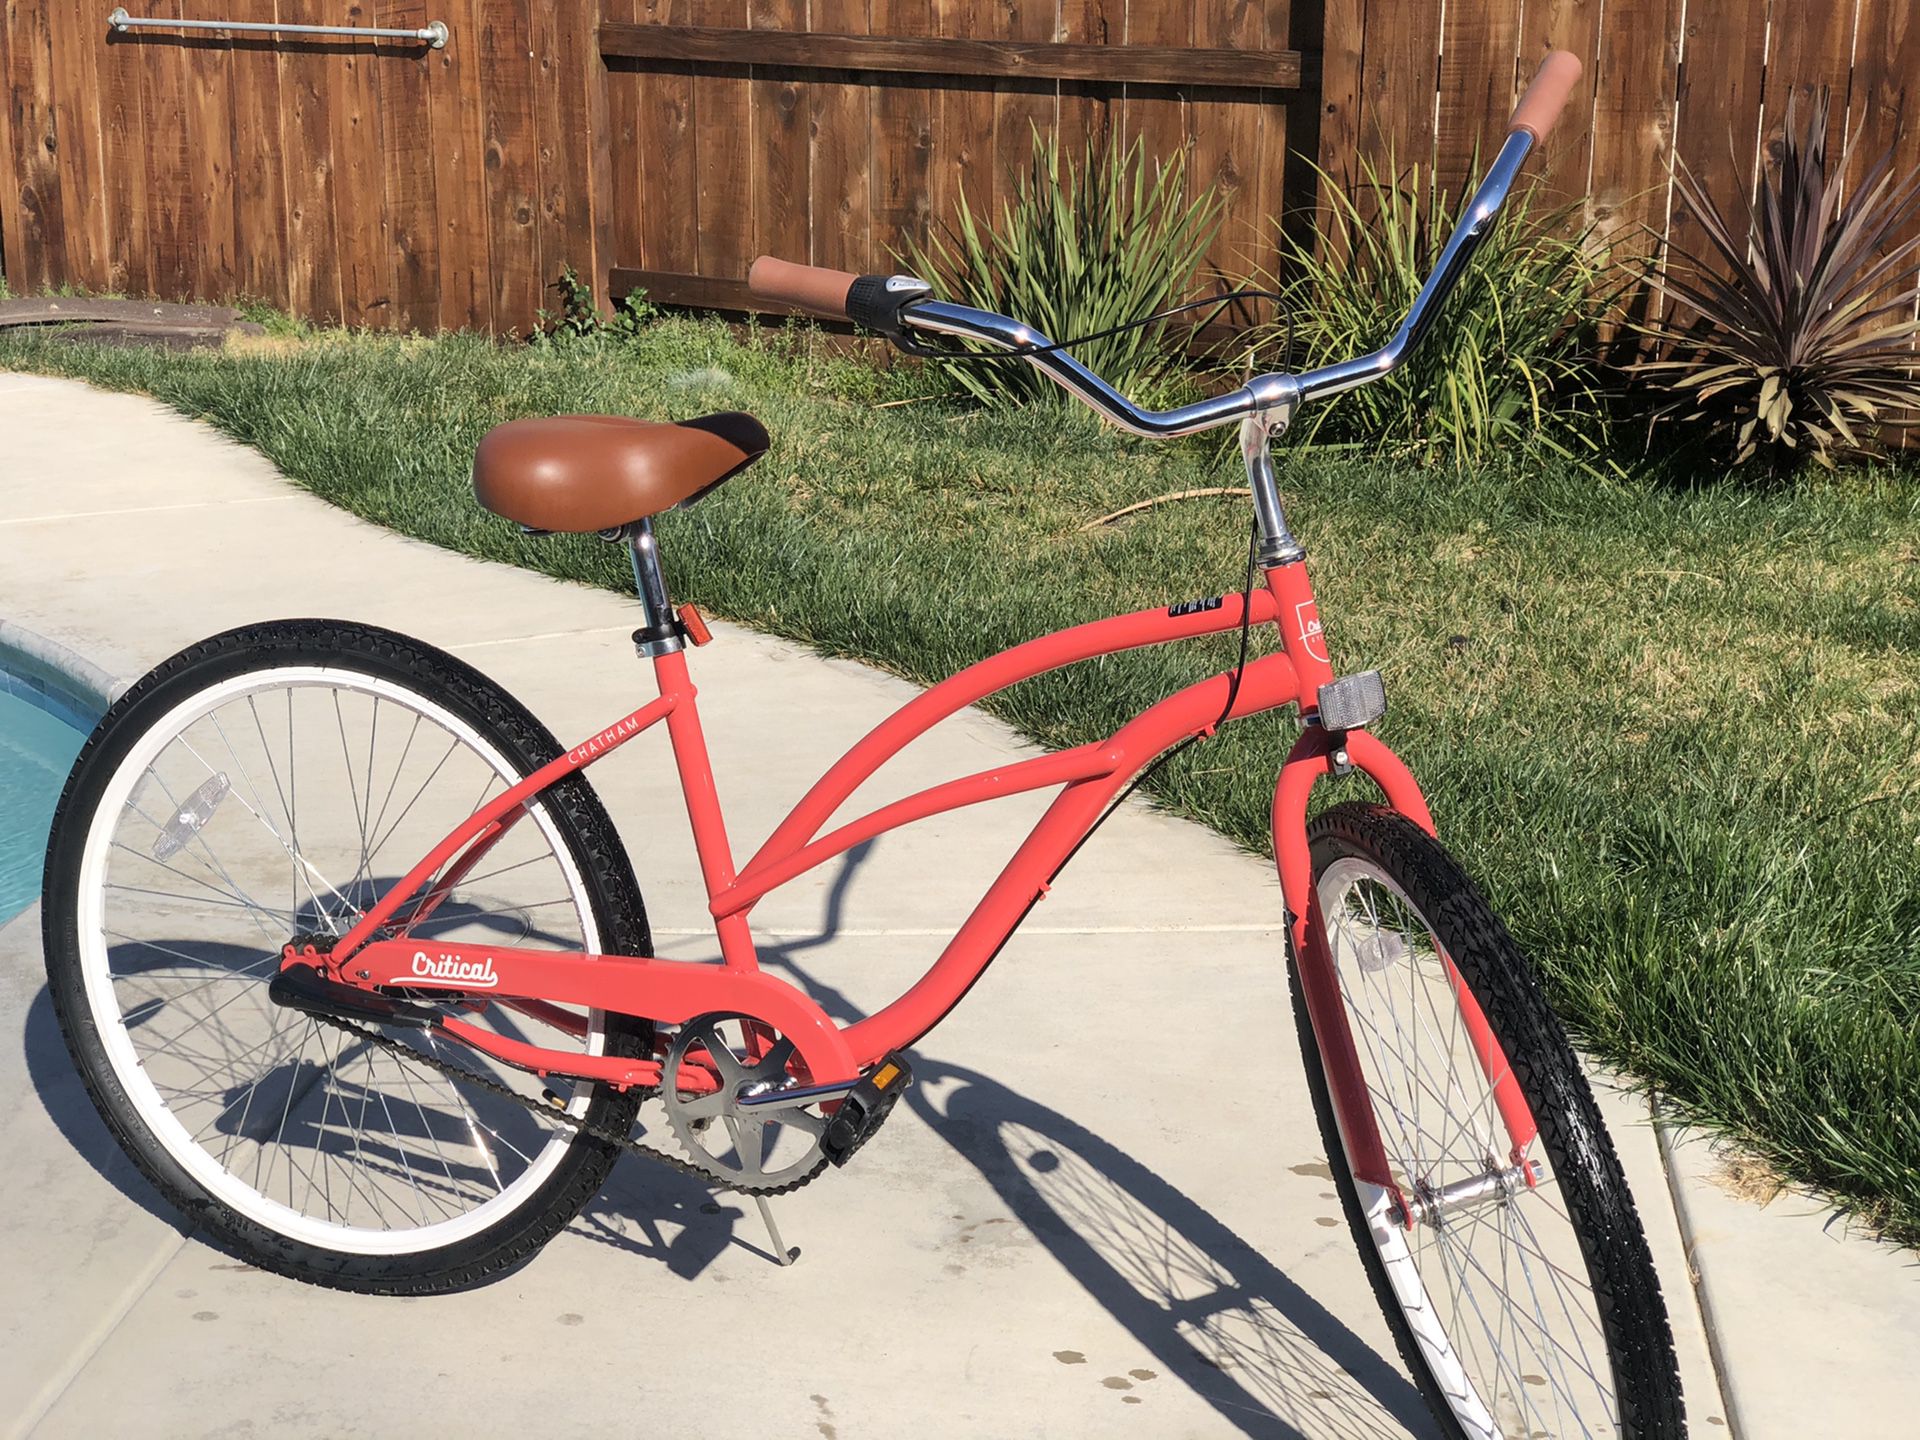 Critical Cycle Ladies 3 speed cruiser